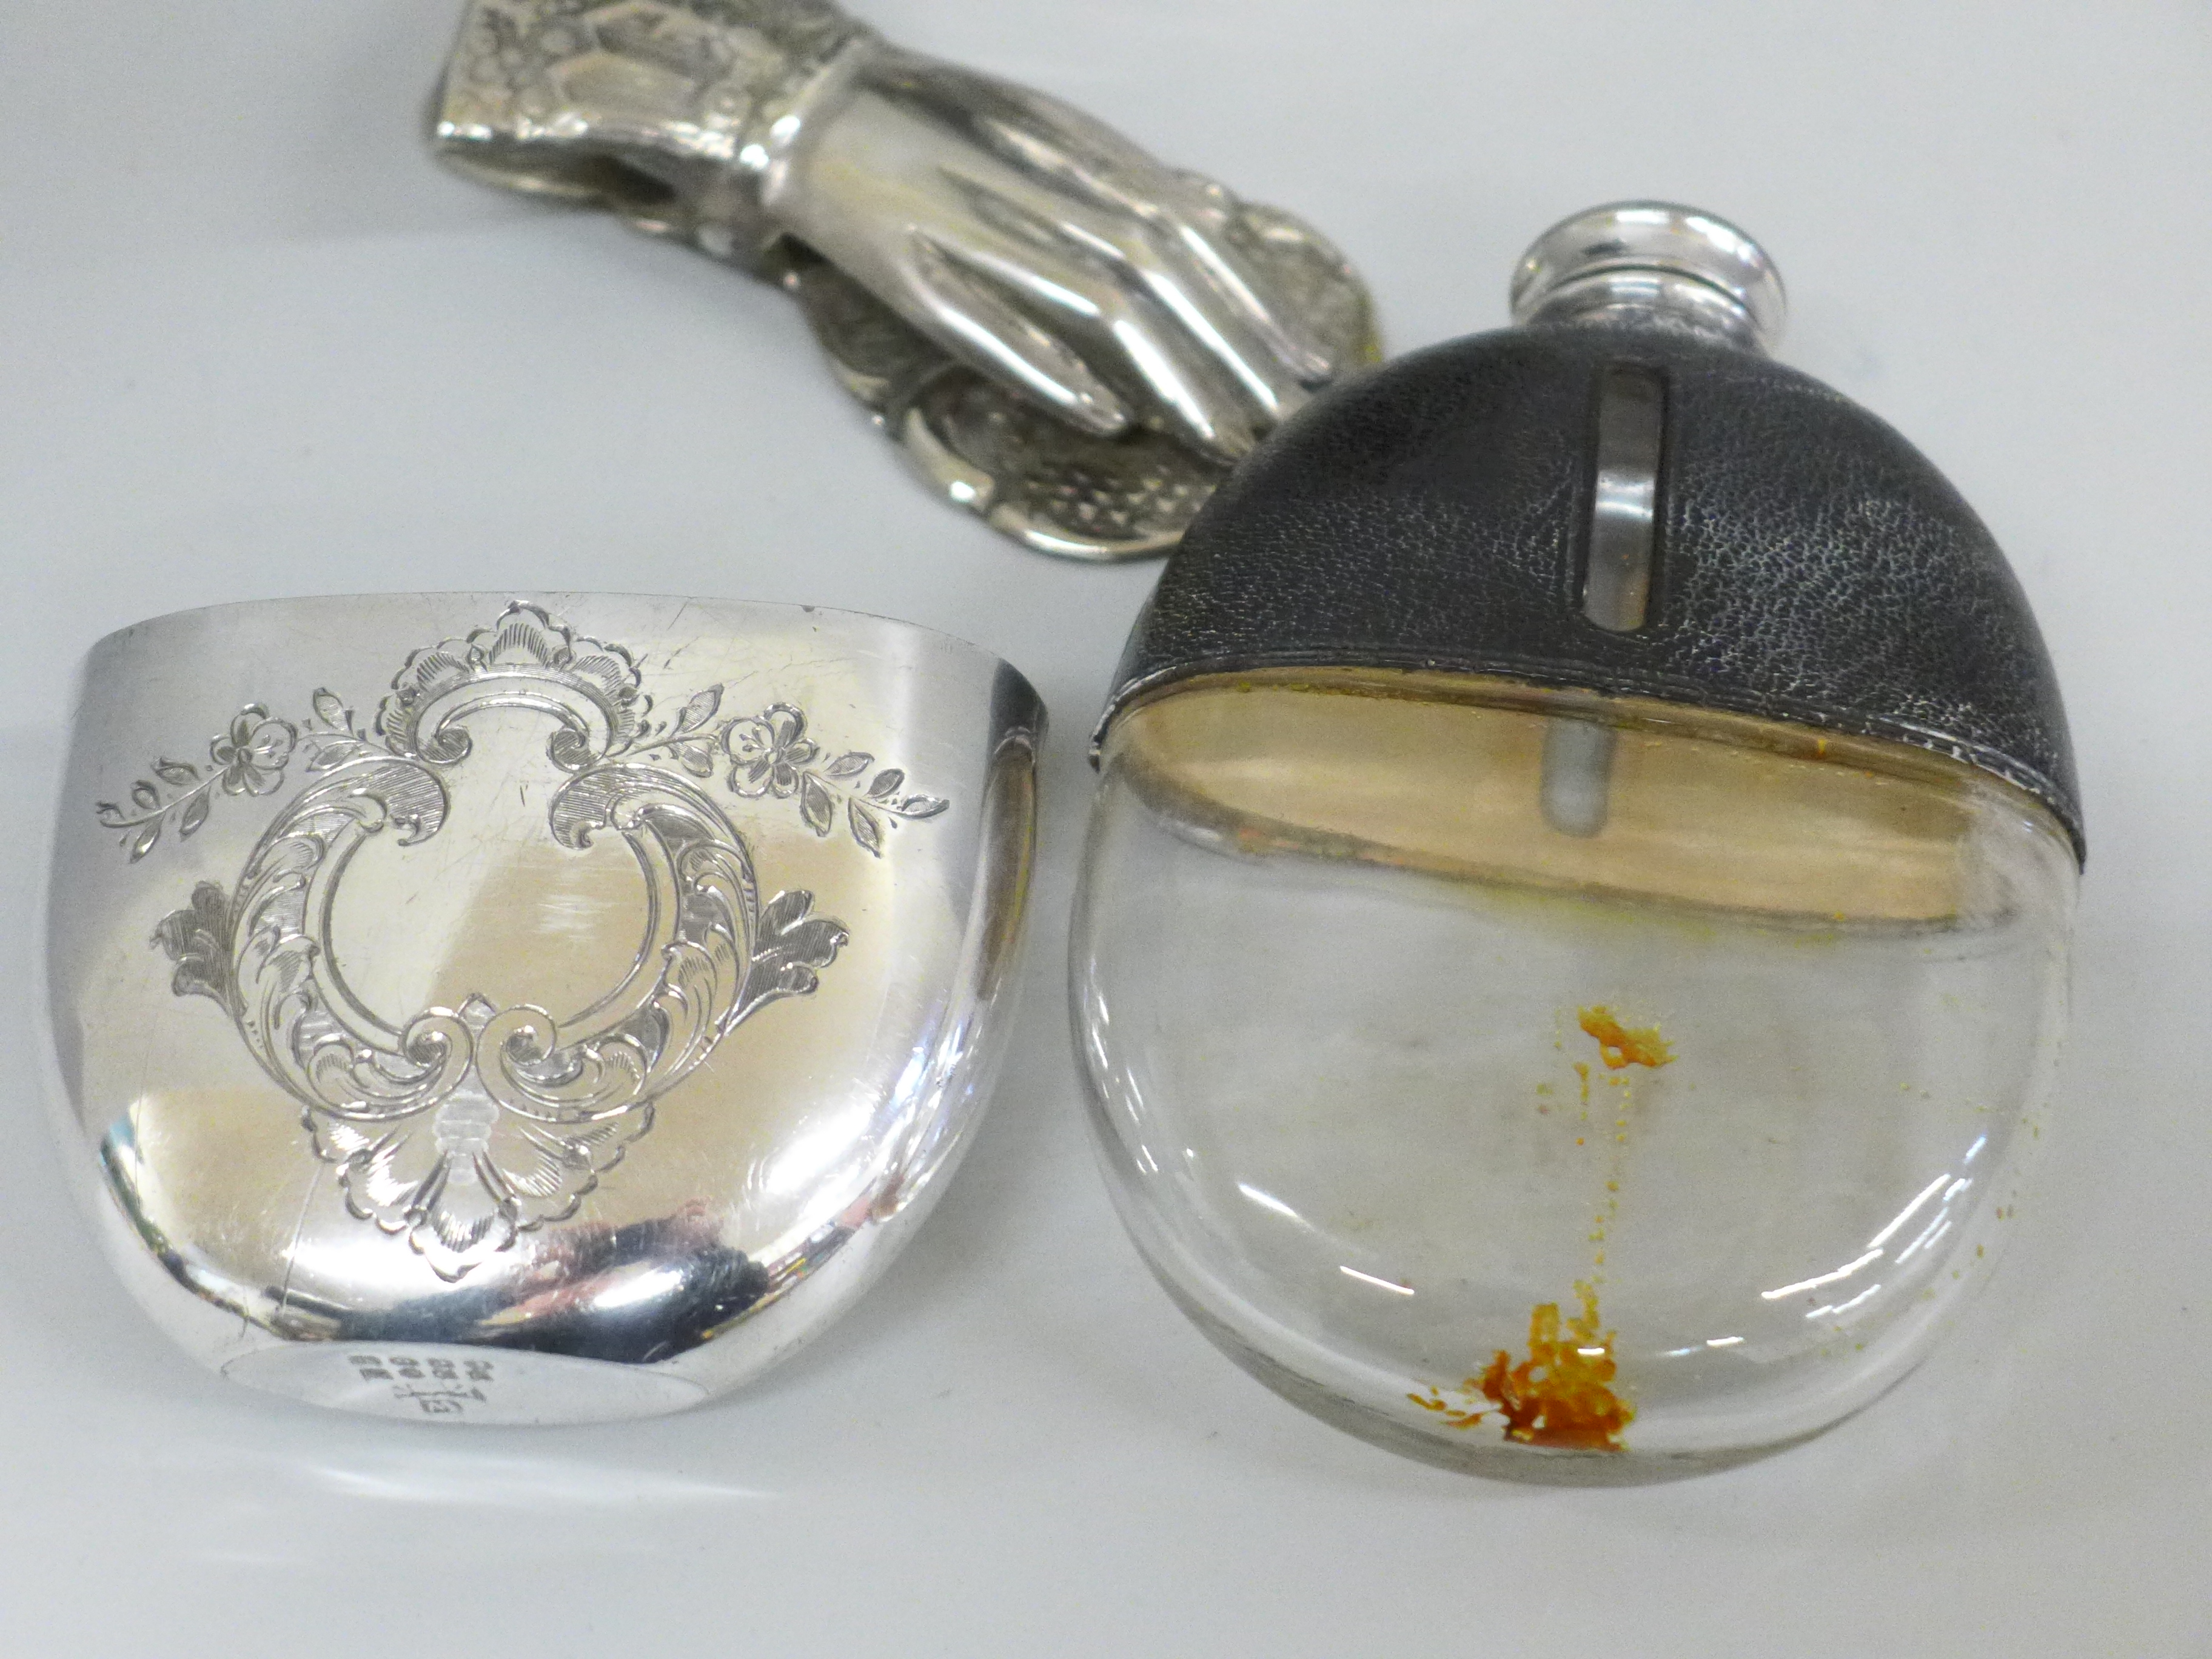 Two similar hip flasks, leather, glass and silver plated cups and a paper clip in the form of a hand - Image 2 of 2